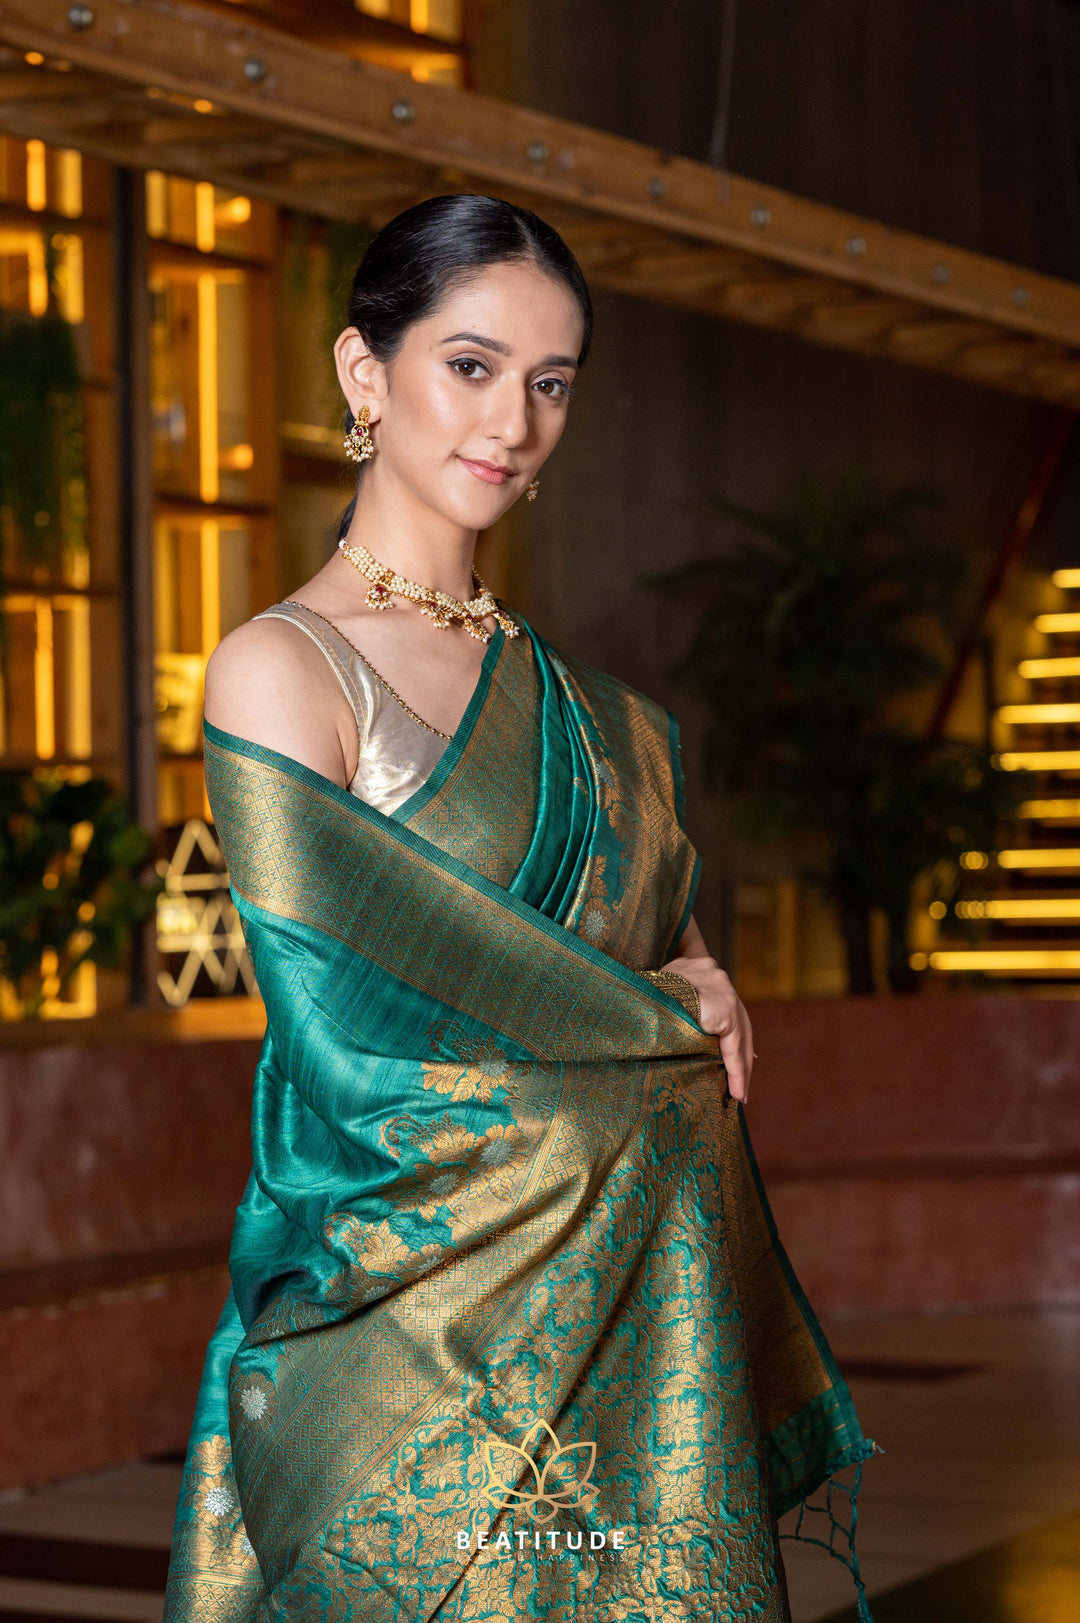 Beatitude Green Gold-Toned Ethnic Motifs Zari Silk Blend Tussar Saree with Unstitched Blouse